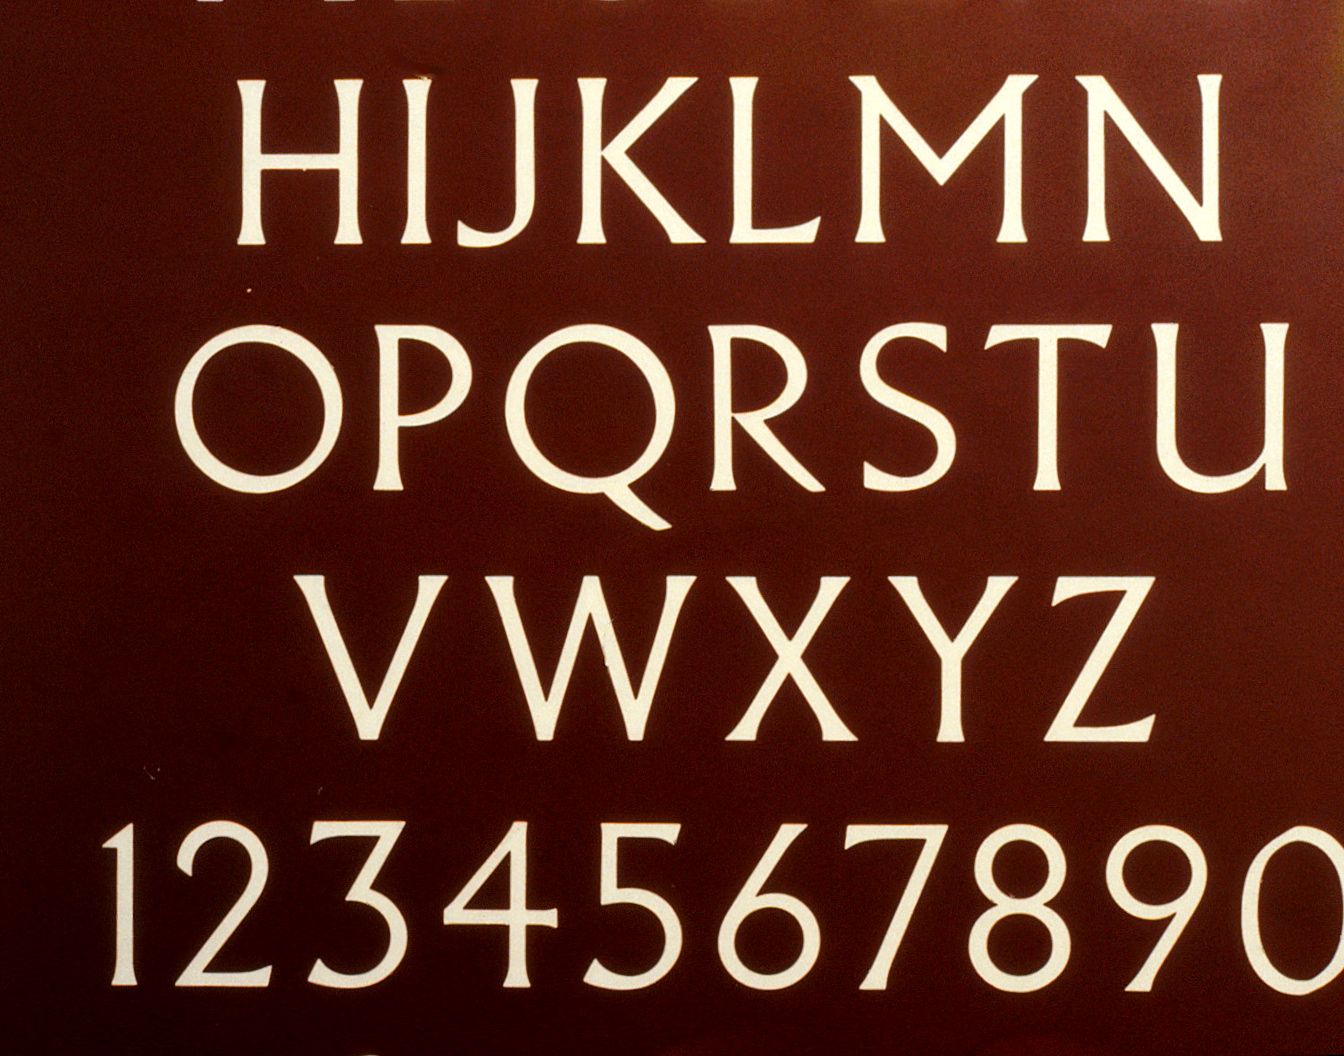 Letters and numbers using the Alburtus font.